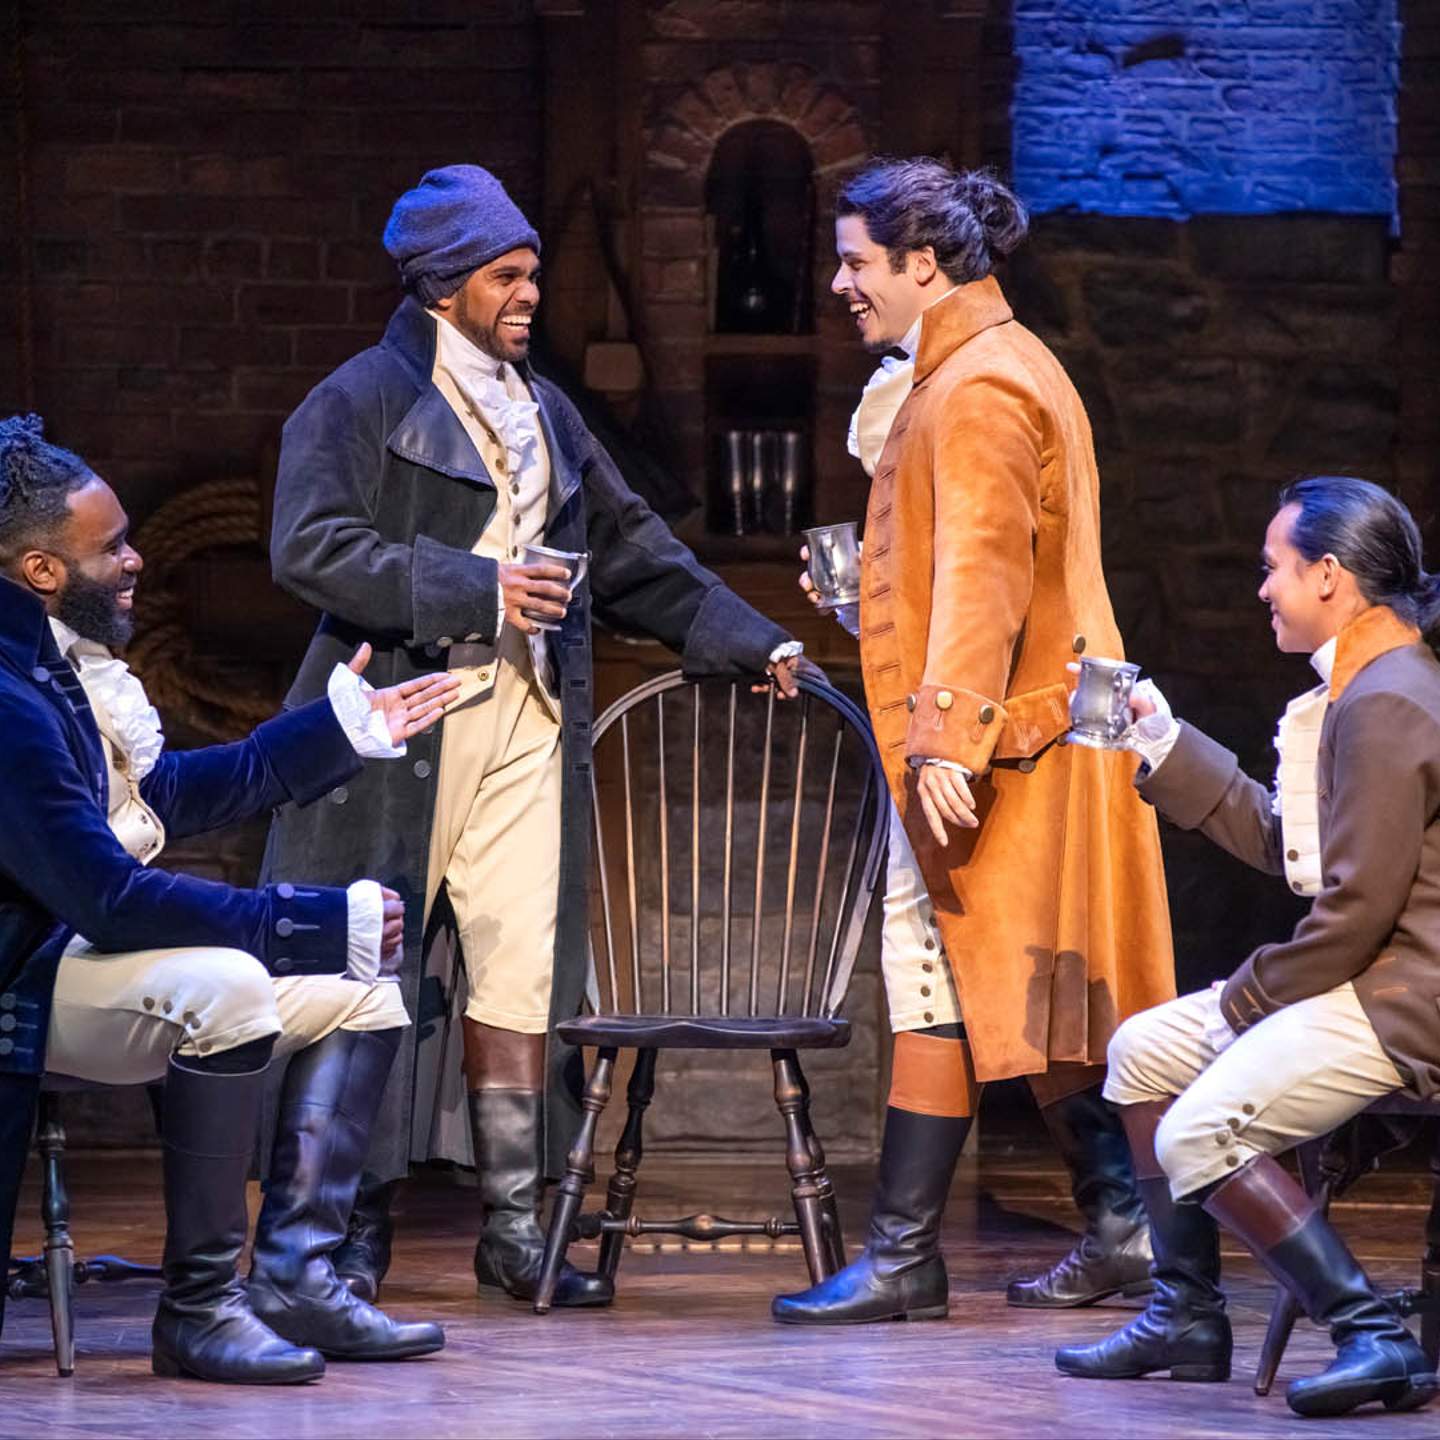 It's official: The smash hit musical Hamilton is coming back to Australia